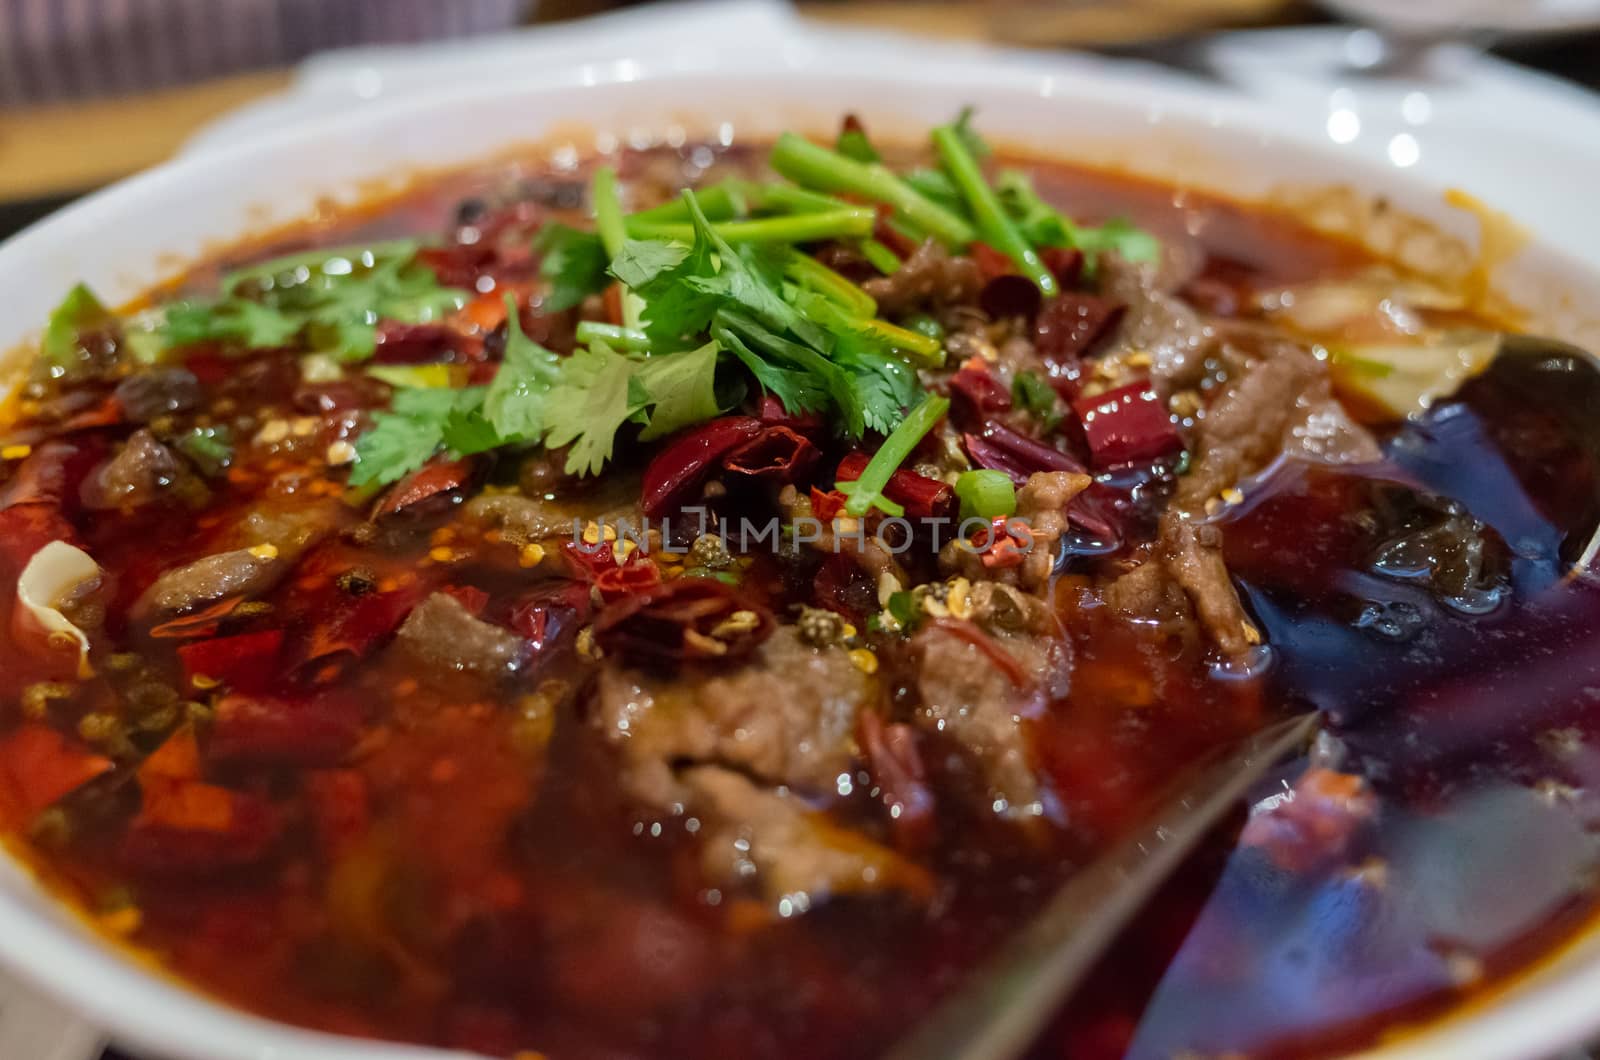 Sze Chuan Spicy Hot Pot Beef Dish by kstphotography